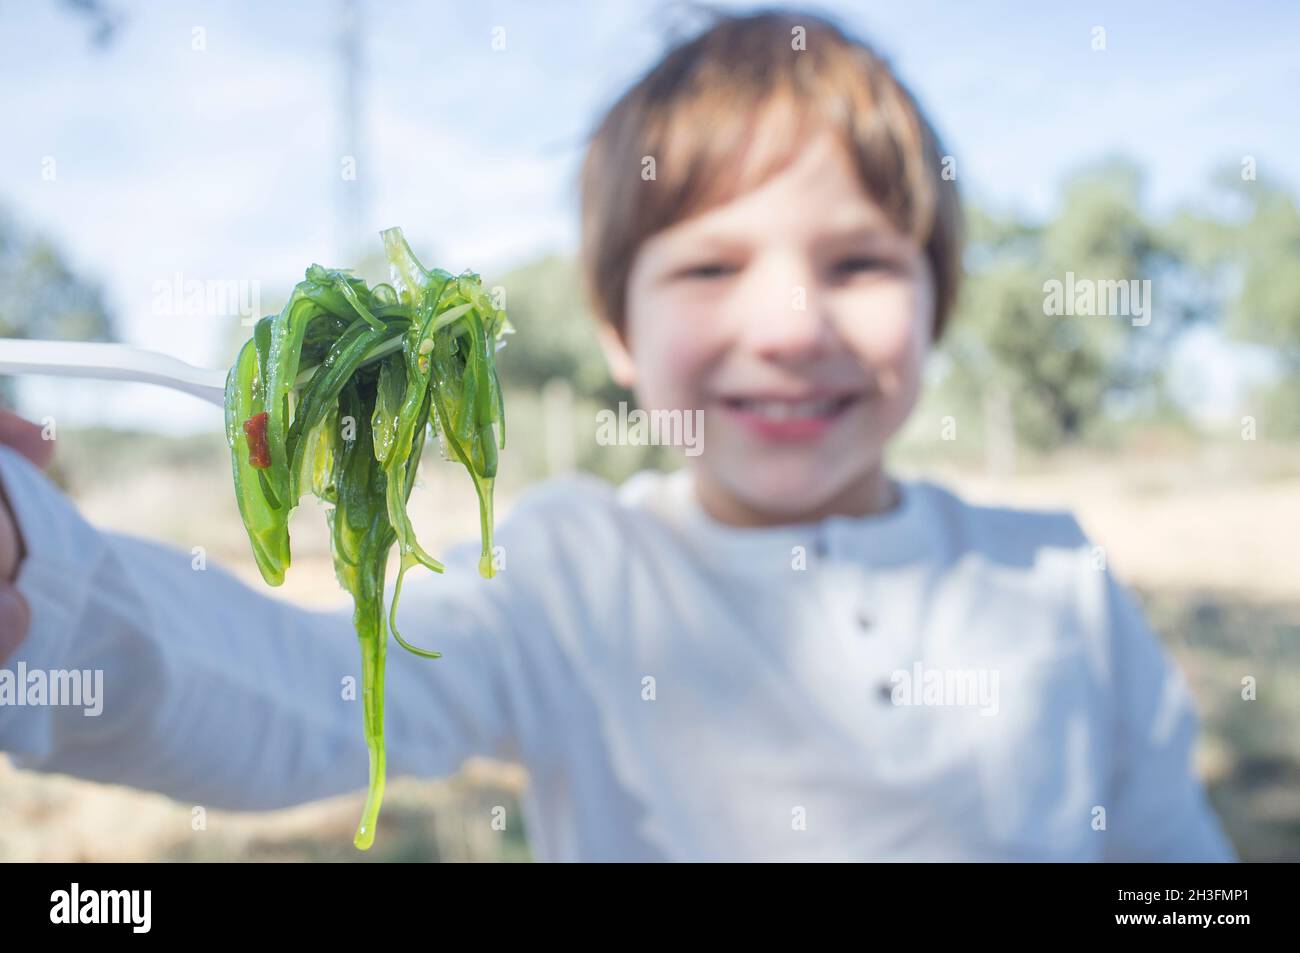 Child boy with wakame salad on fork. Outdoors background Stock Photo